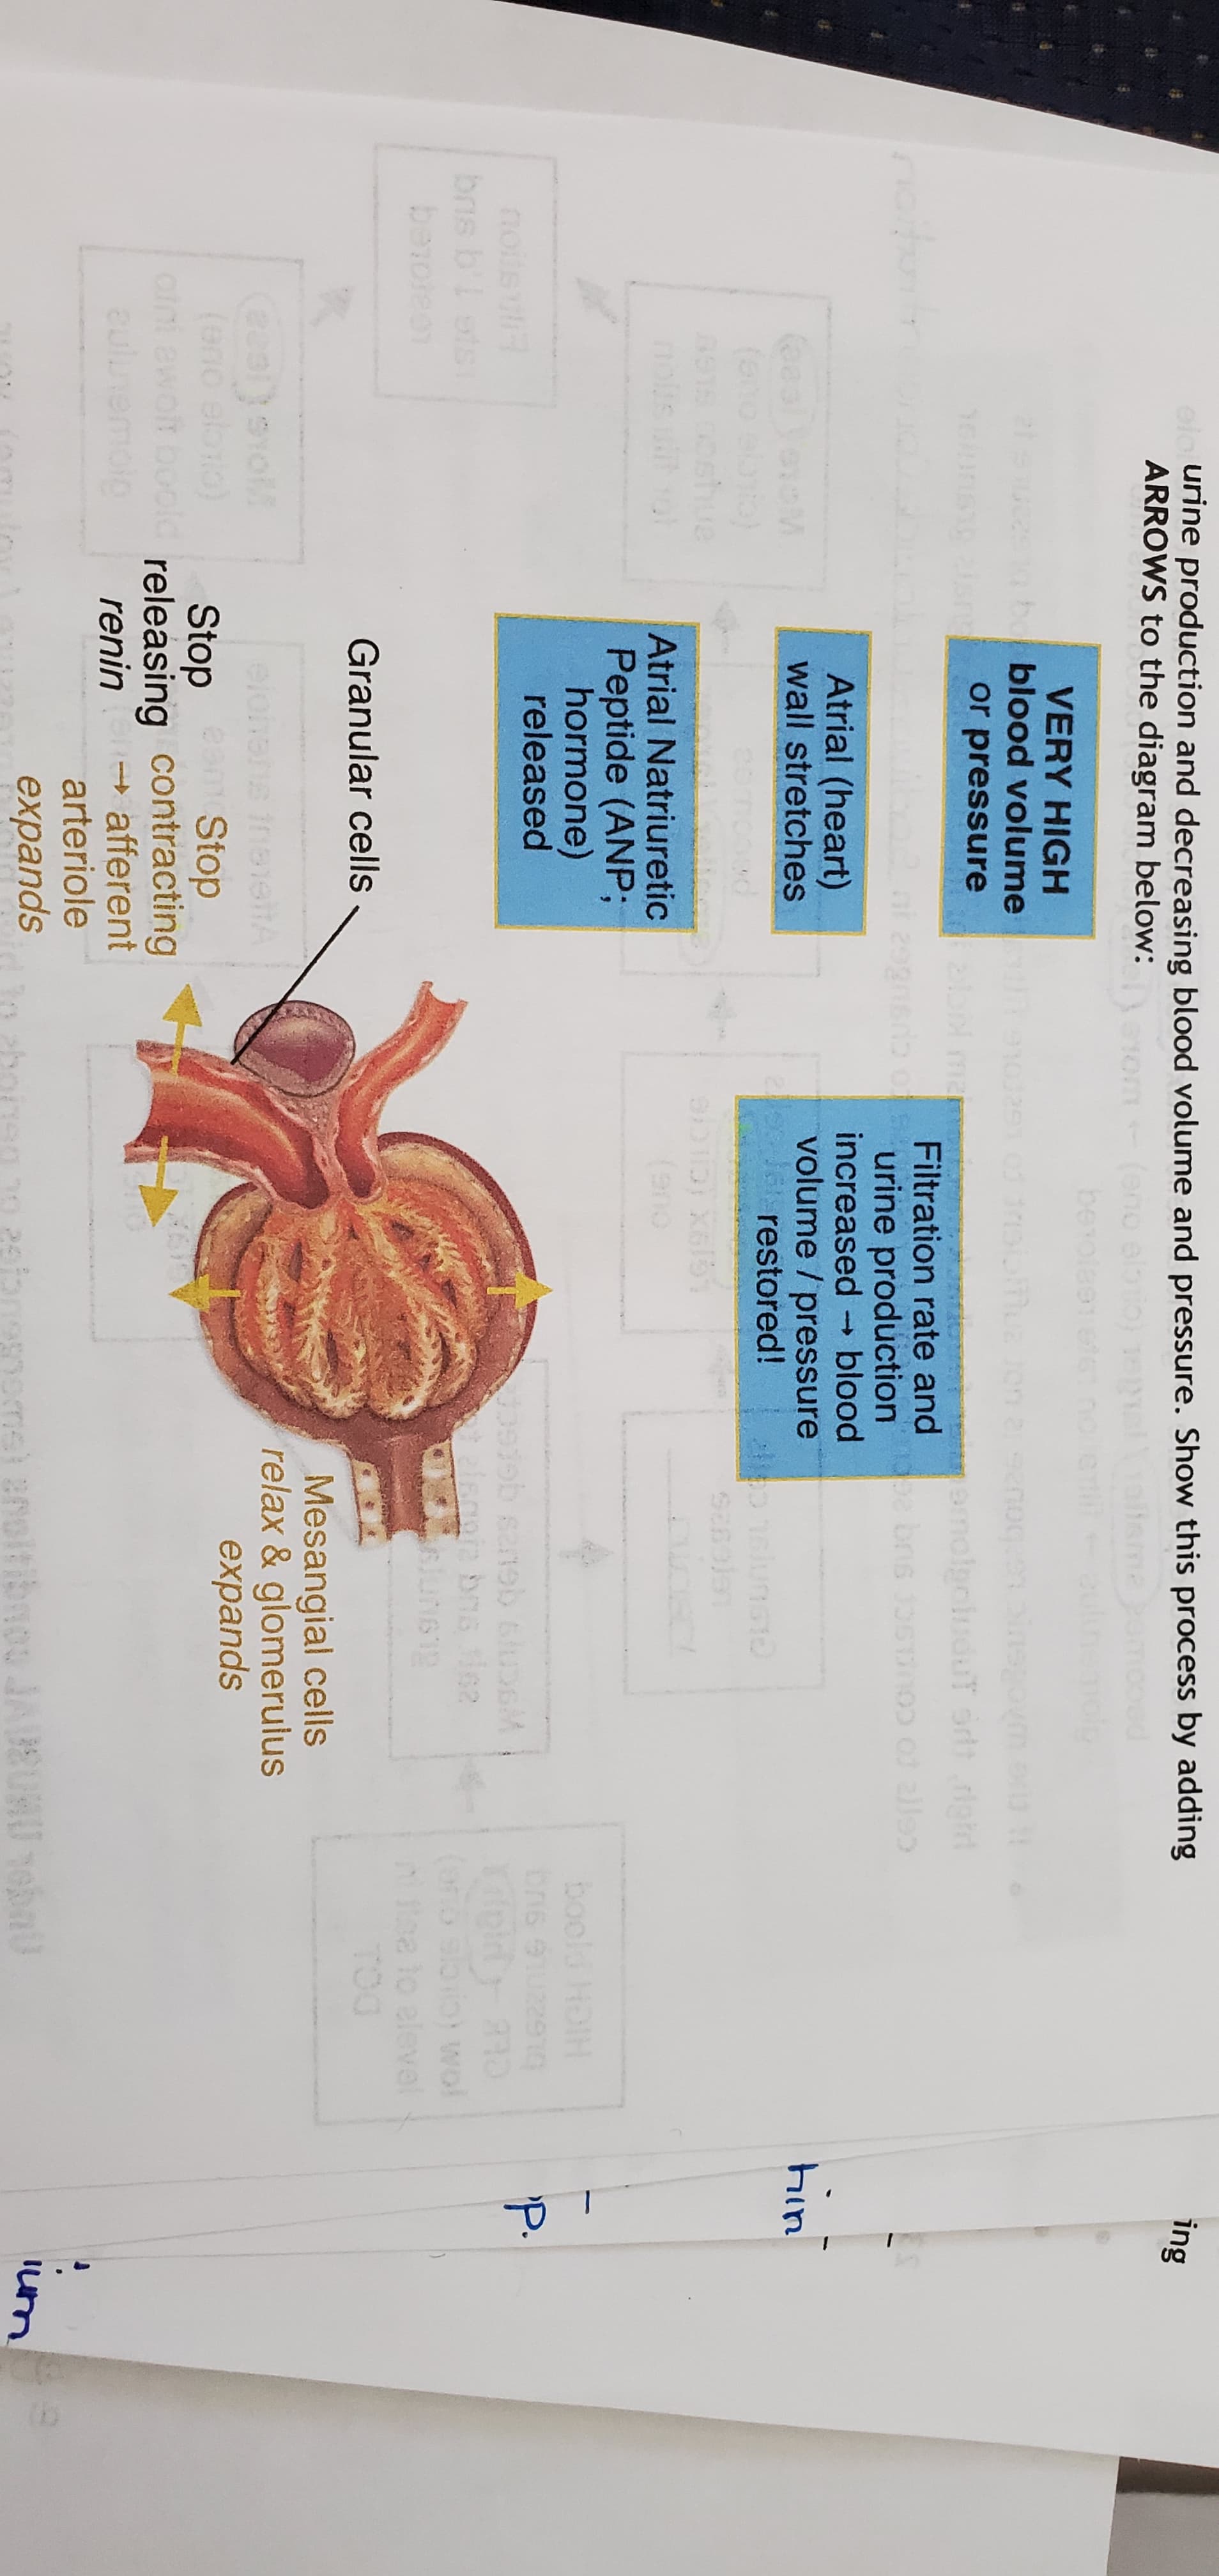 elo urine production and decreasing blood volume and pressure. Show this process by adding
ARROWS to the diagram below:
ing
om
be
vol
VERY HIGH
21s bo blood volume
or pressure
insgovm
ndt molgoluduT ortt right
Filtration rate and
urine production
increased blood
volume / pressure
leJe restored!
noitns
Atrial (heart)
wall stretches
(eealyeoM
CLOunst
A915 00shuae
nous o
Atrial Natriuretic
Peptide (ANP;
hormone)
released
HICH PIOOG
P.
boc
br
noitsu
bis bl sts
ob sansb slussM
(ofo soio) wol
taa lo eleval
TOO
slunsig
Learateg
Granular cells
Mesangial cells
relax & glomerulus
expands
inaieltA
(eno eloio)
otni ewolt bo
aulunemoig
Stop
Stop
releasing contracting
- afferent
arteriole
renin
iun
expands
2bonegno 2sione
ns) anoiti
noo JAEUMU 1ebaU
